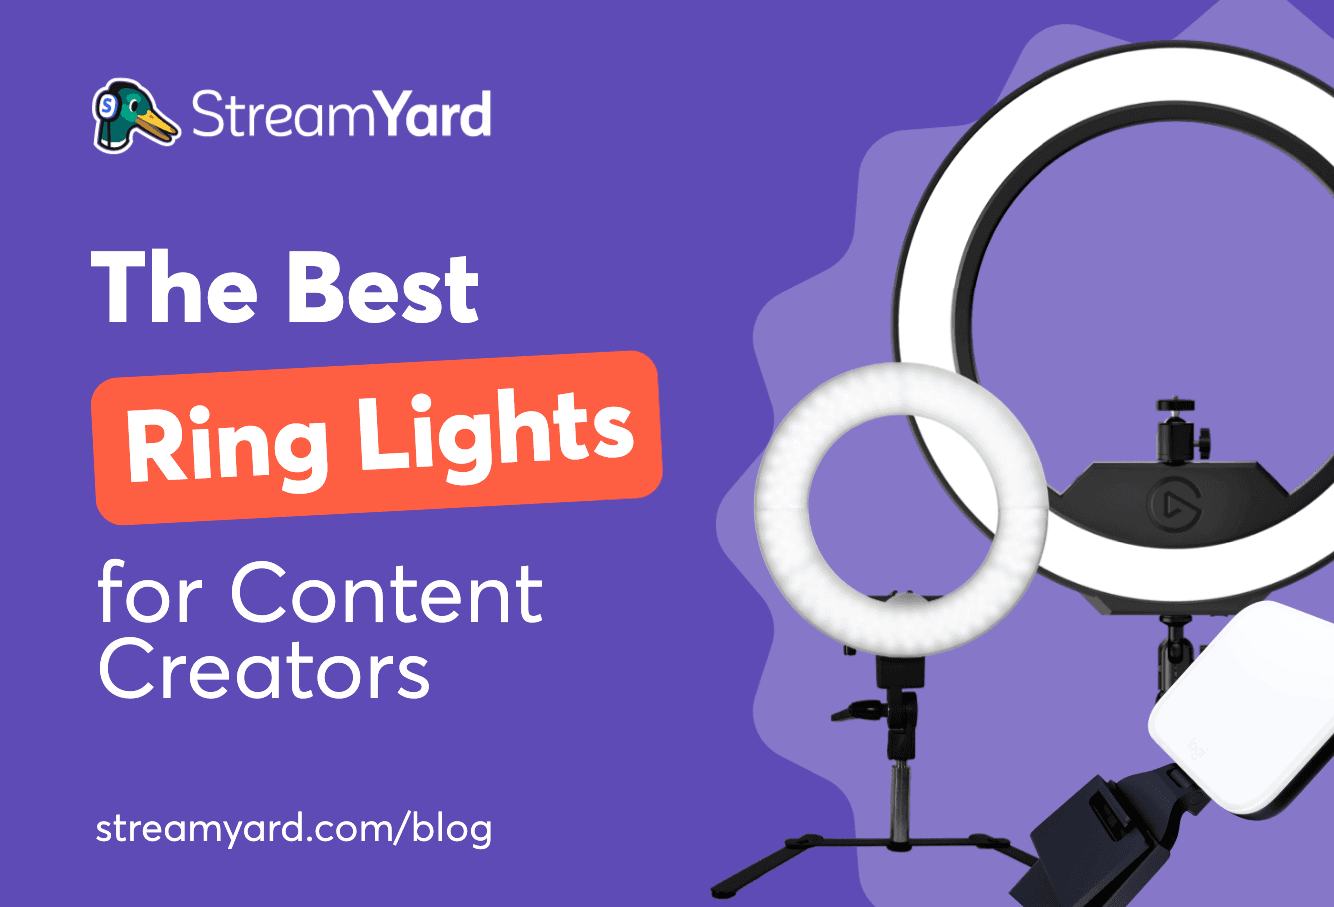 A ring light is an essential piece of live streaming gear for any content creator. Apart from illuminating your face well, it elevates the production quality too. Read on to learn about the best ring lights for content creators.